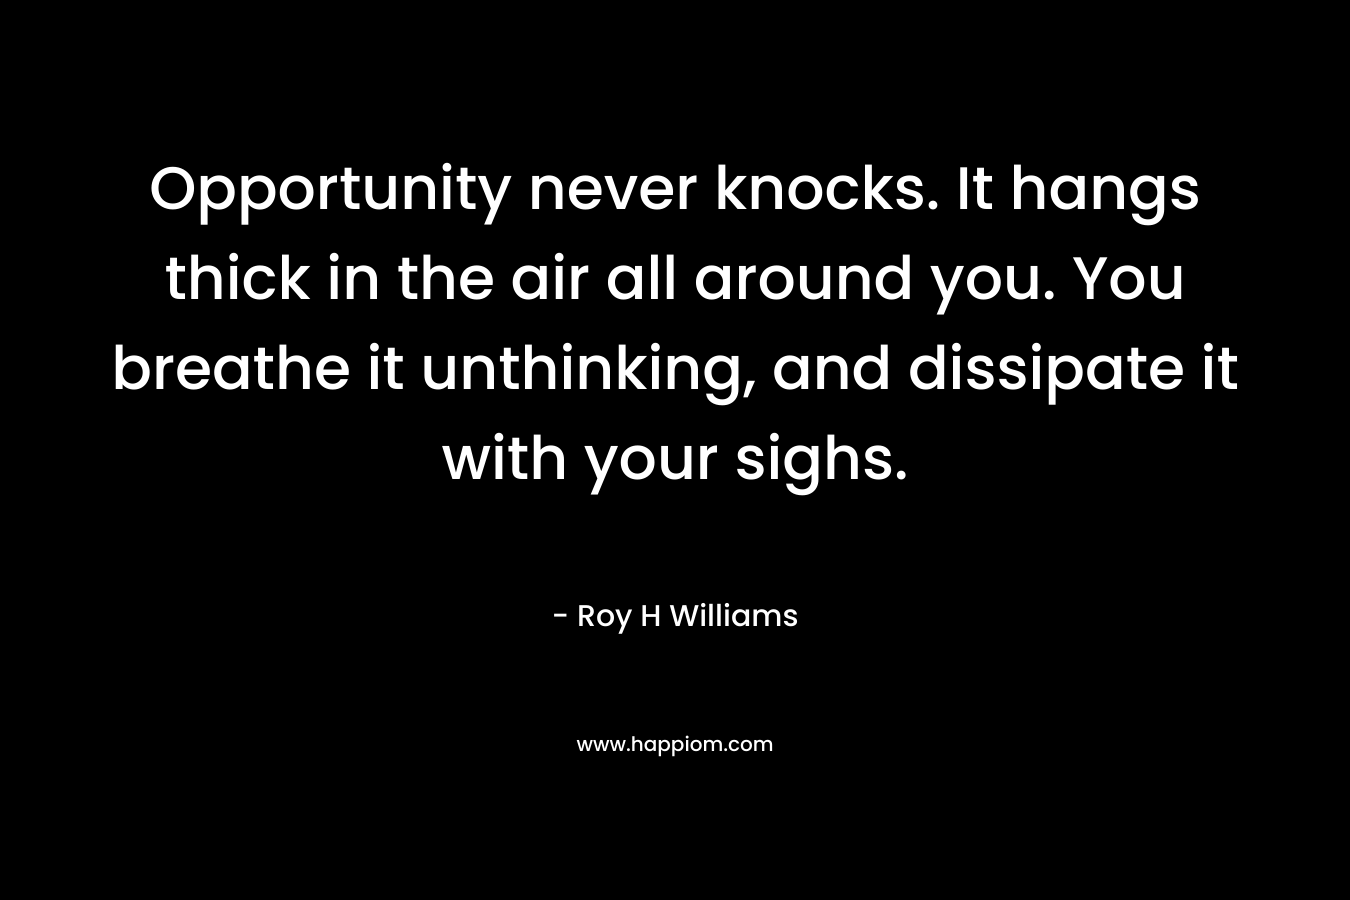 Opportunity never knocks. It hangs thick in the air all around you. You breathe it unthinking, and dissipate it with your sighs. – Roy H Williams